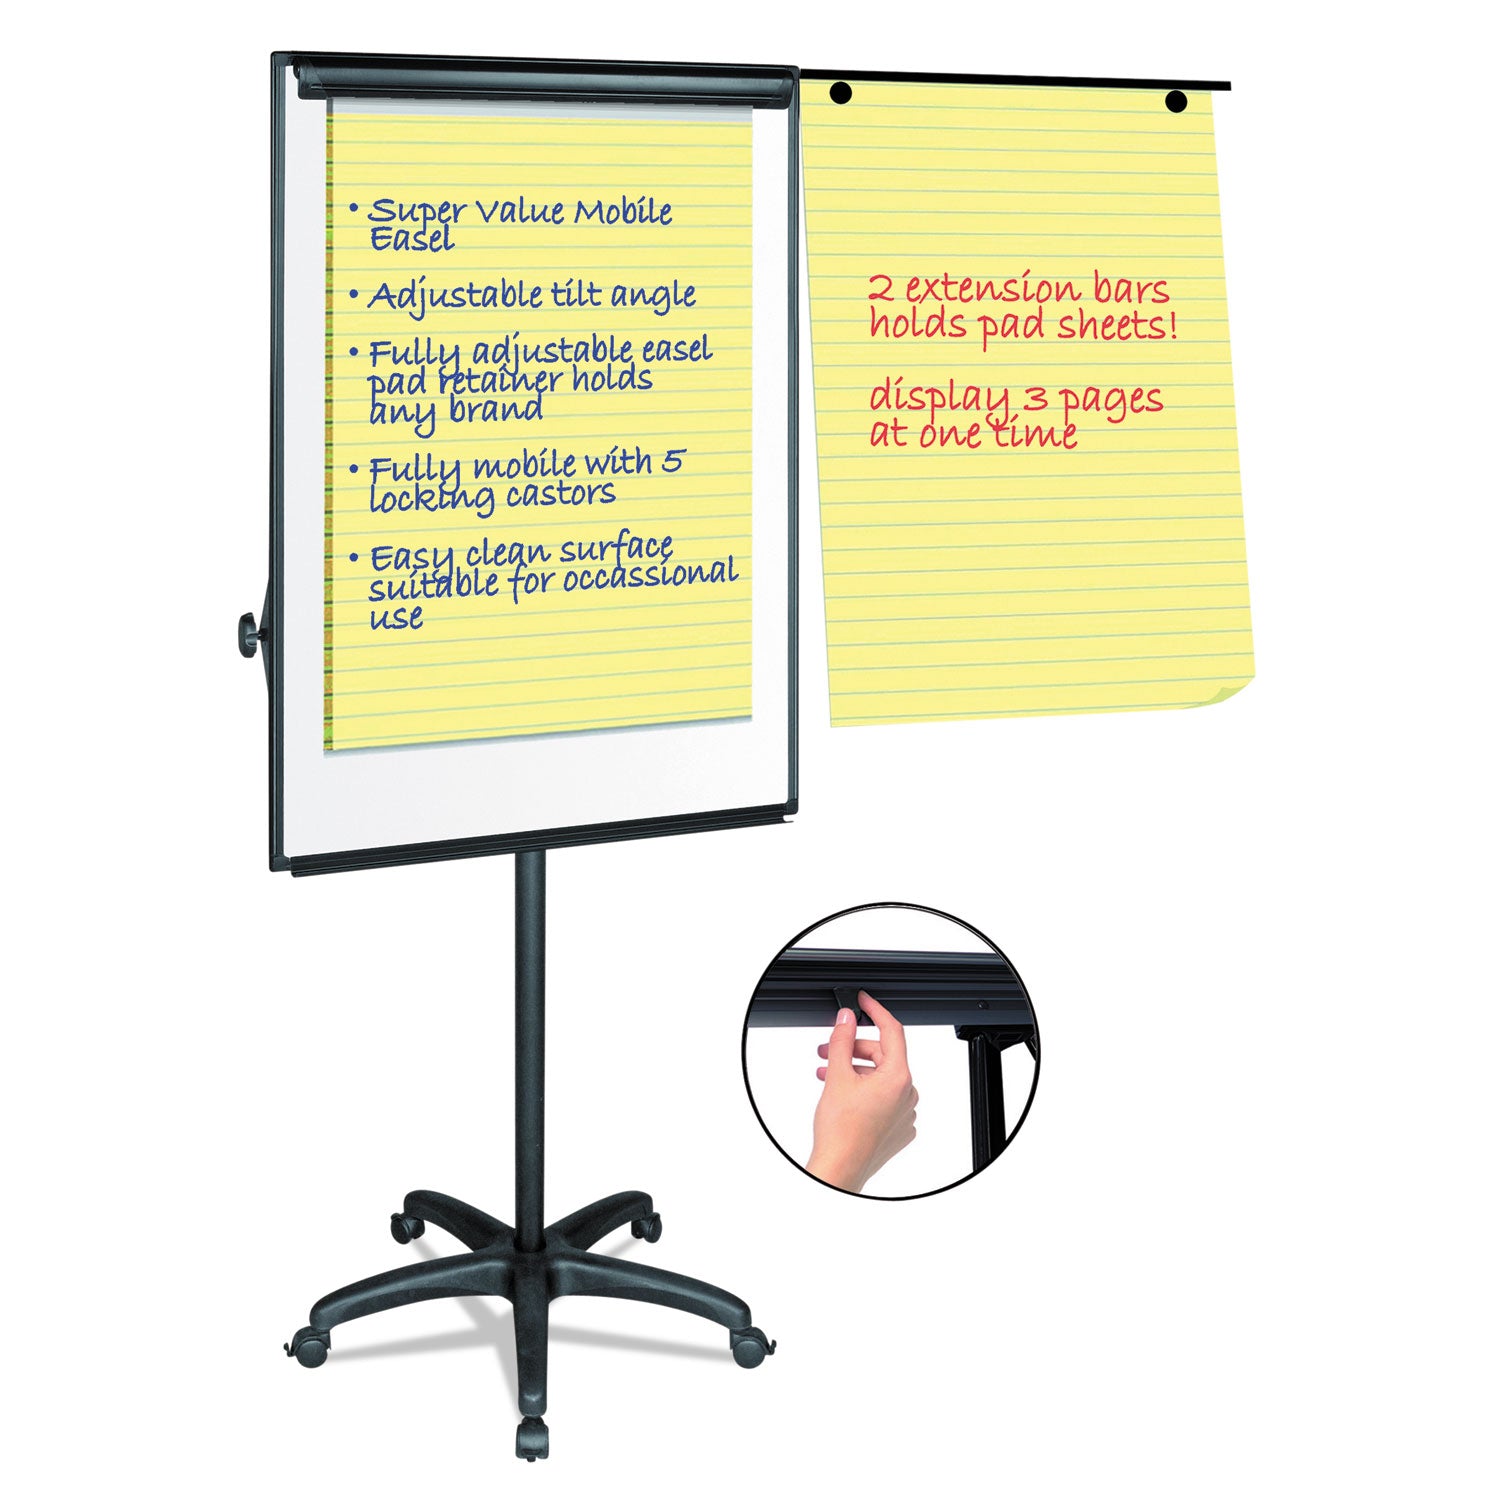 Silver Easy Clean Dry Erase Mobile Presentation Easel, 44" to 75.25" High - 